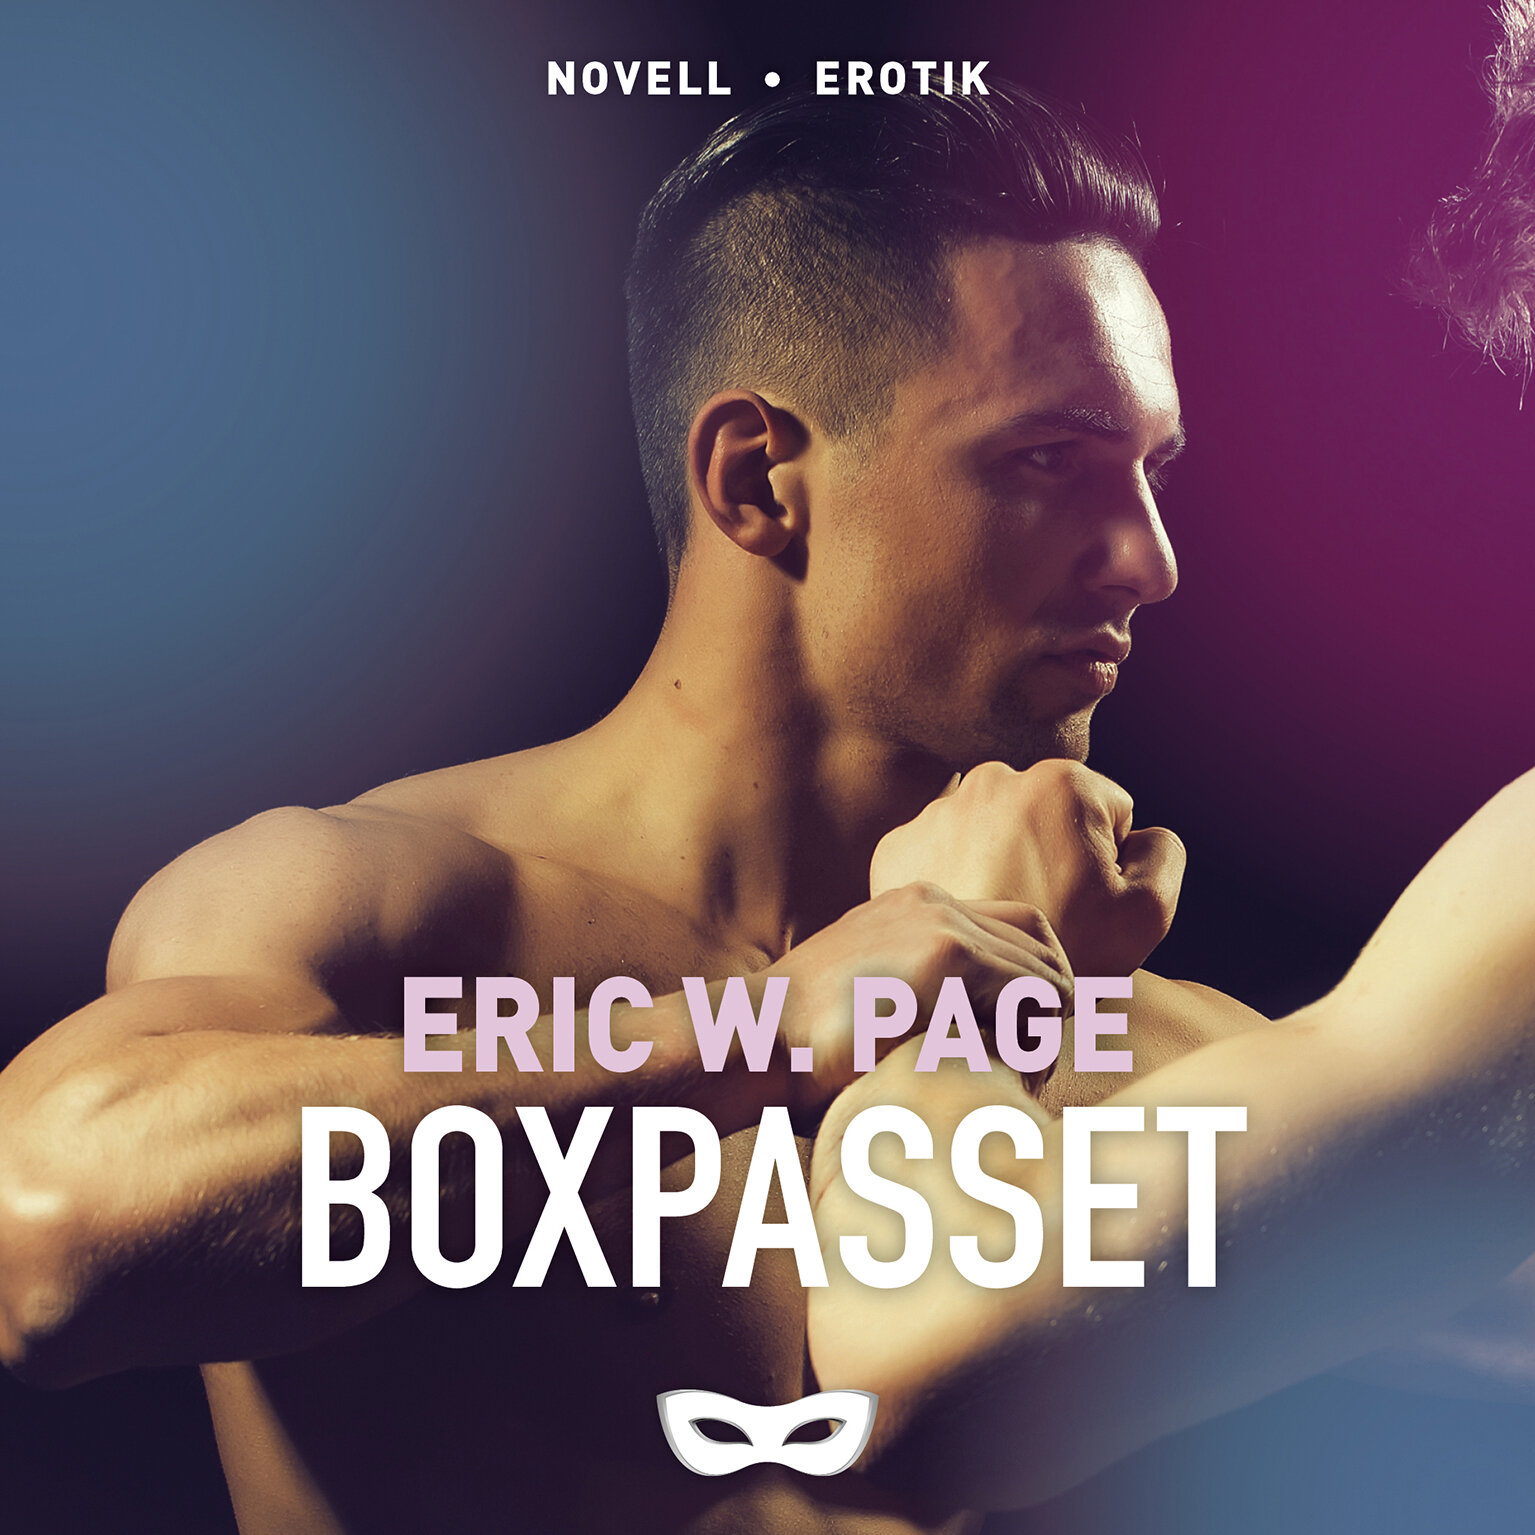 PAGE1 Eric W Page Boxpasset omslag audio.jpg